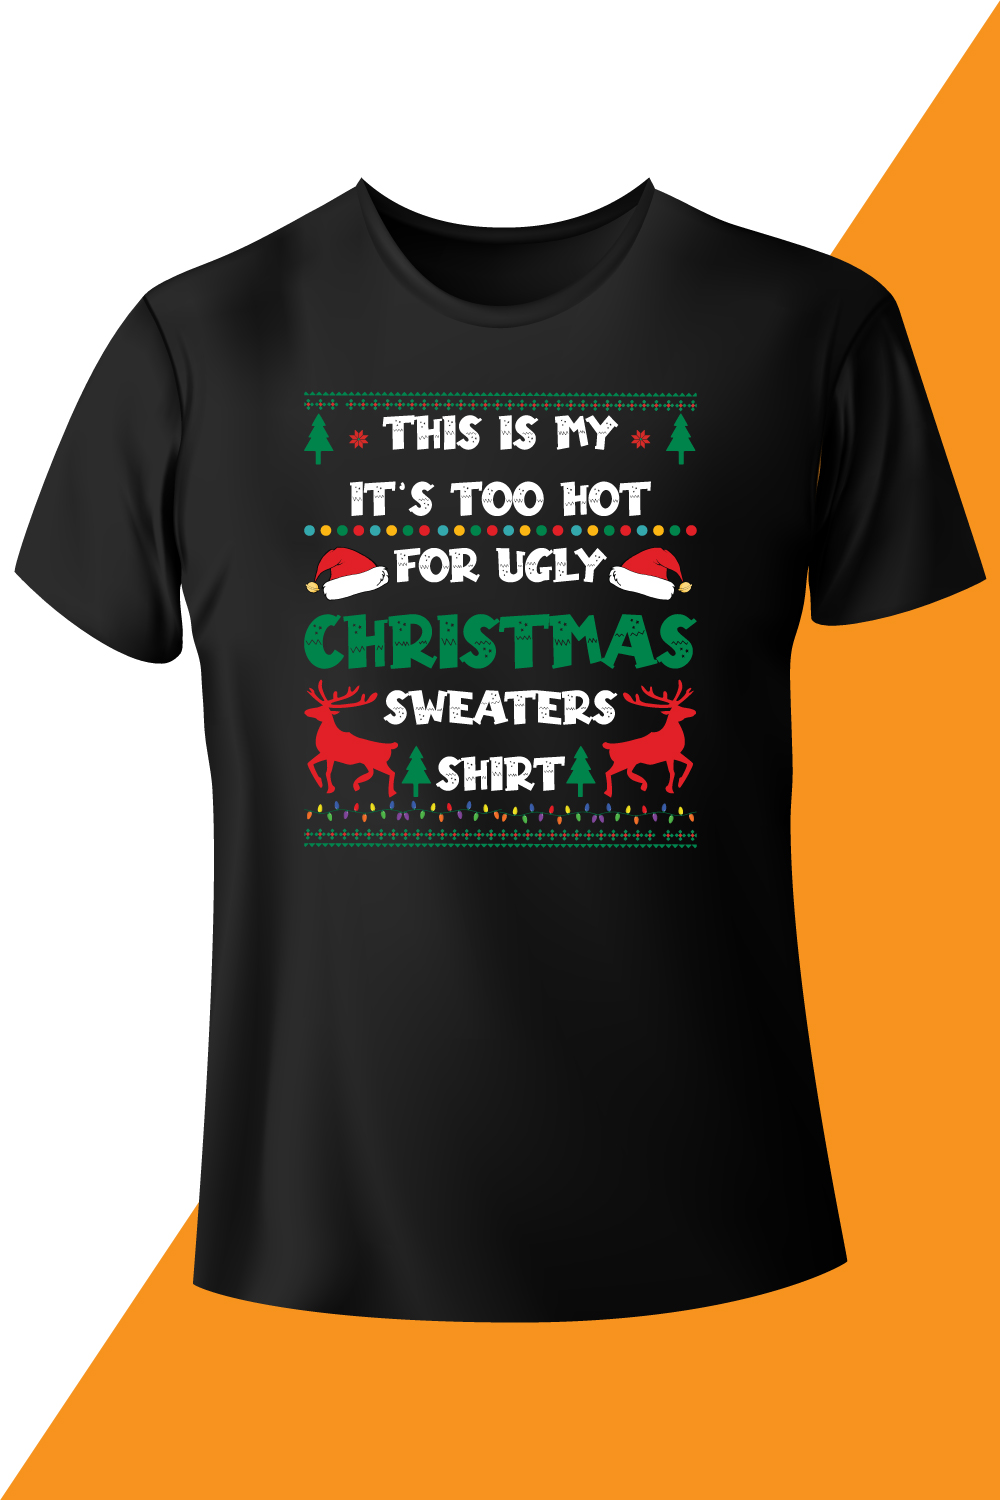 Image black t-shirts with enchanting inscription this is my it's too hot for ugly christmas sweaters shirt.